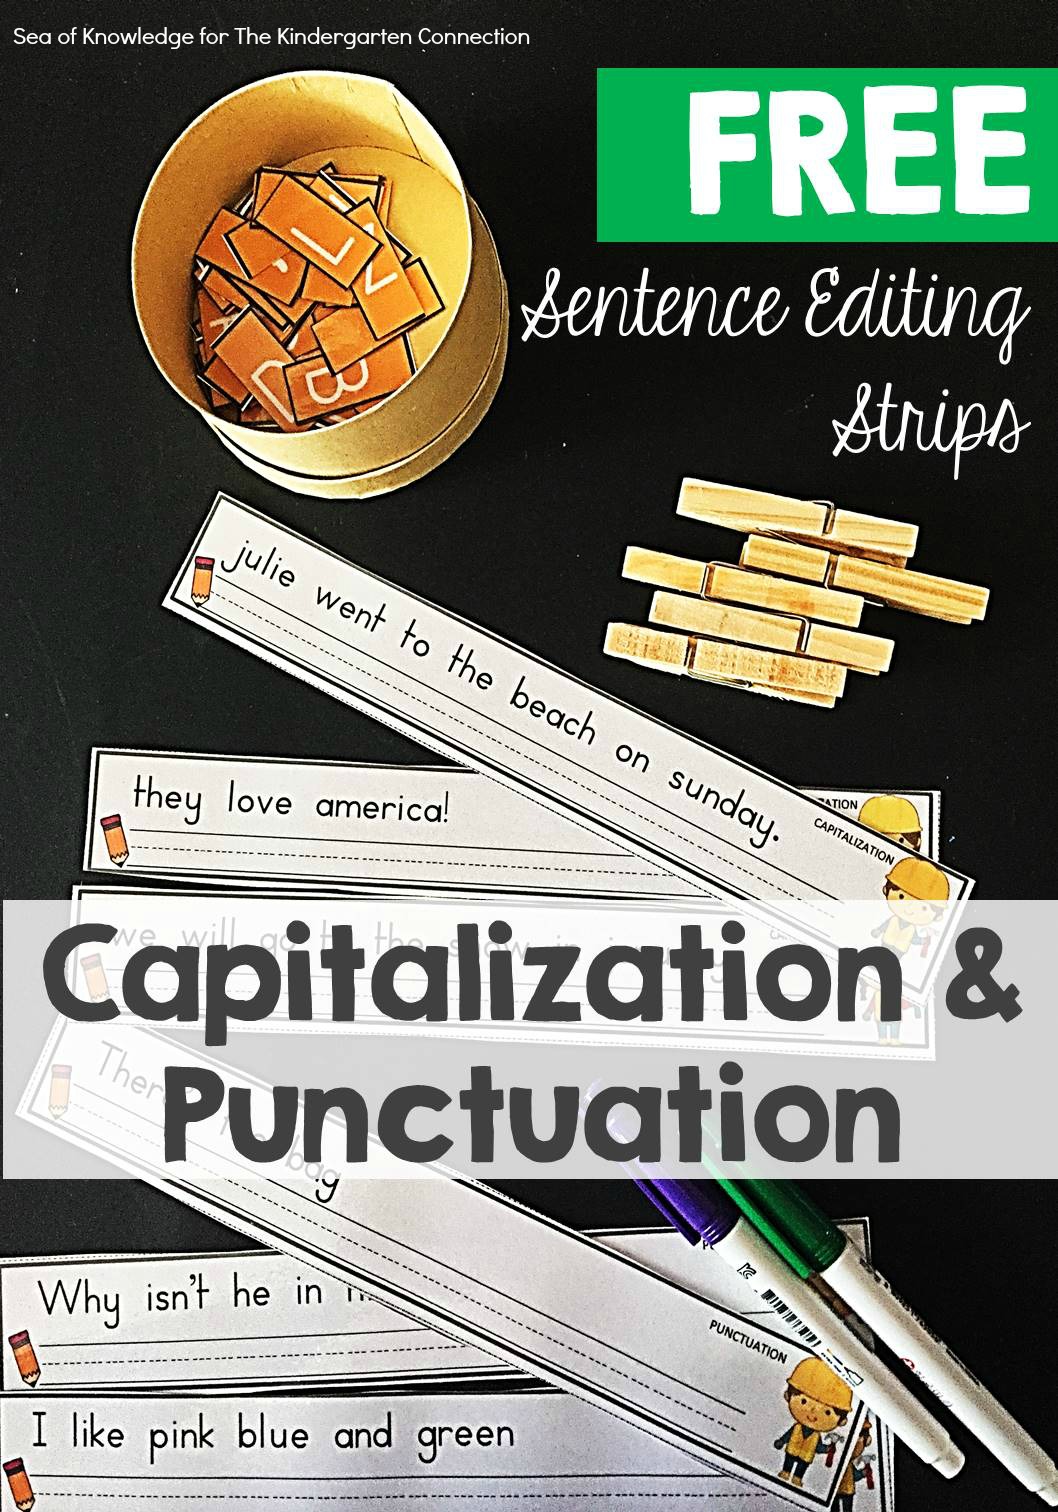 These sentence editing strips are perfect for early elementary students to work on capitalization and punctuation in a fun, hands on way!